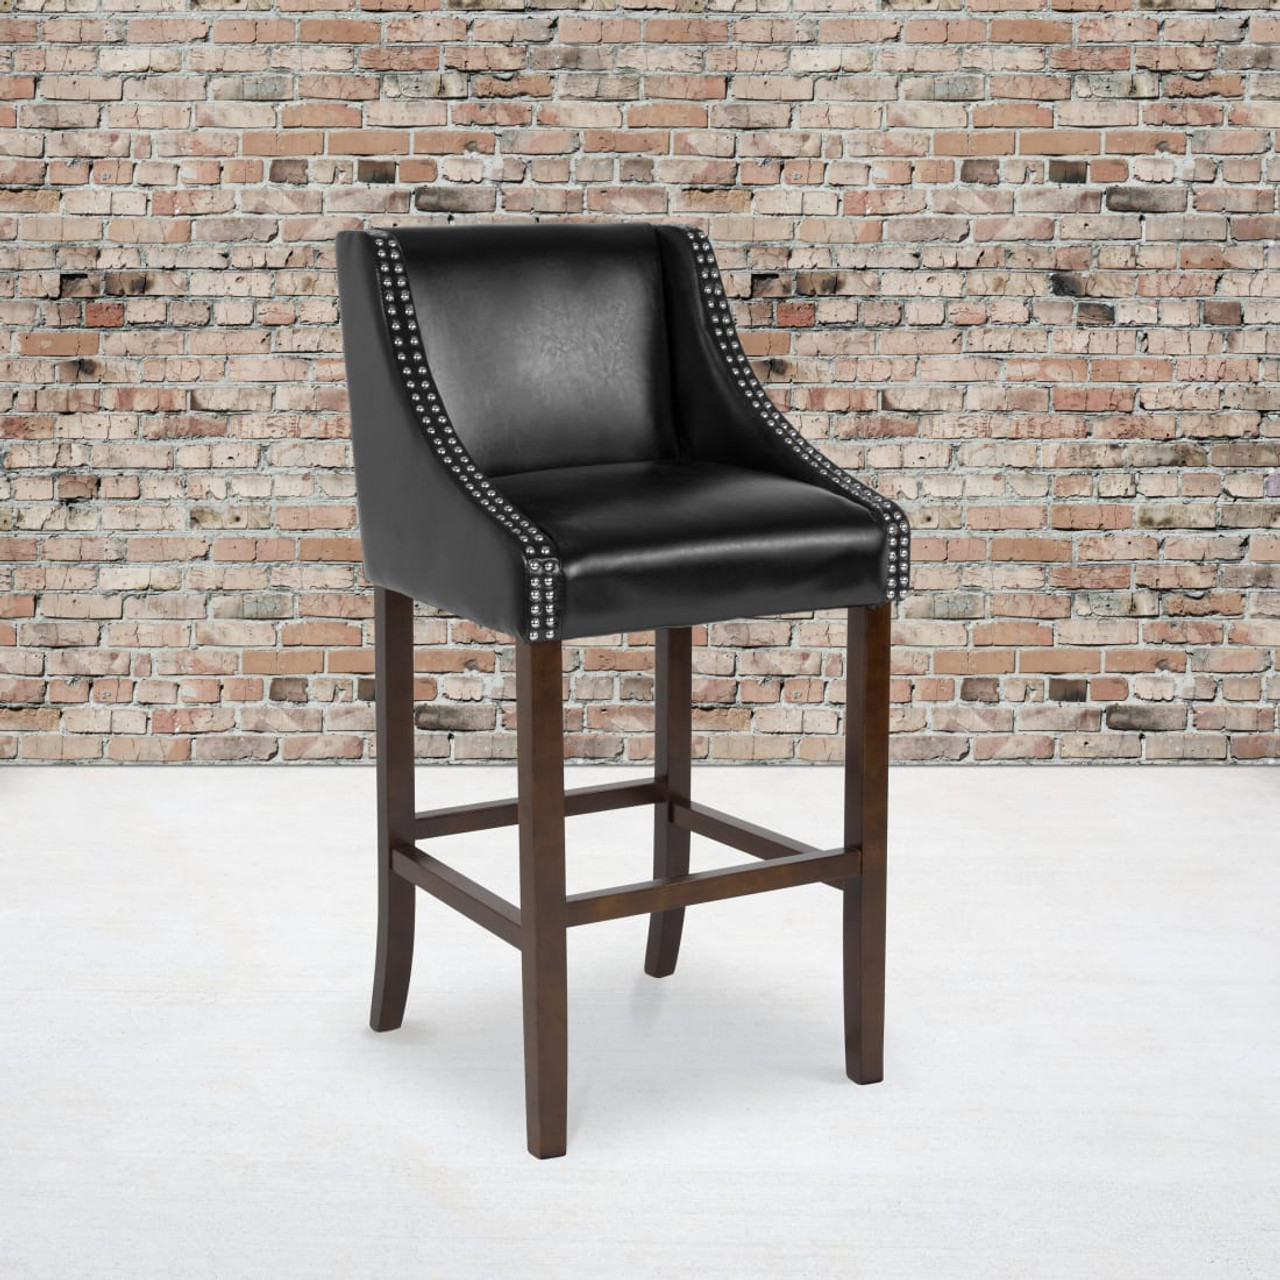 Carmel Series 30” High Transitional Walnut Barstool with Accent Nail Trim in Black LeatherSoft